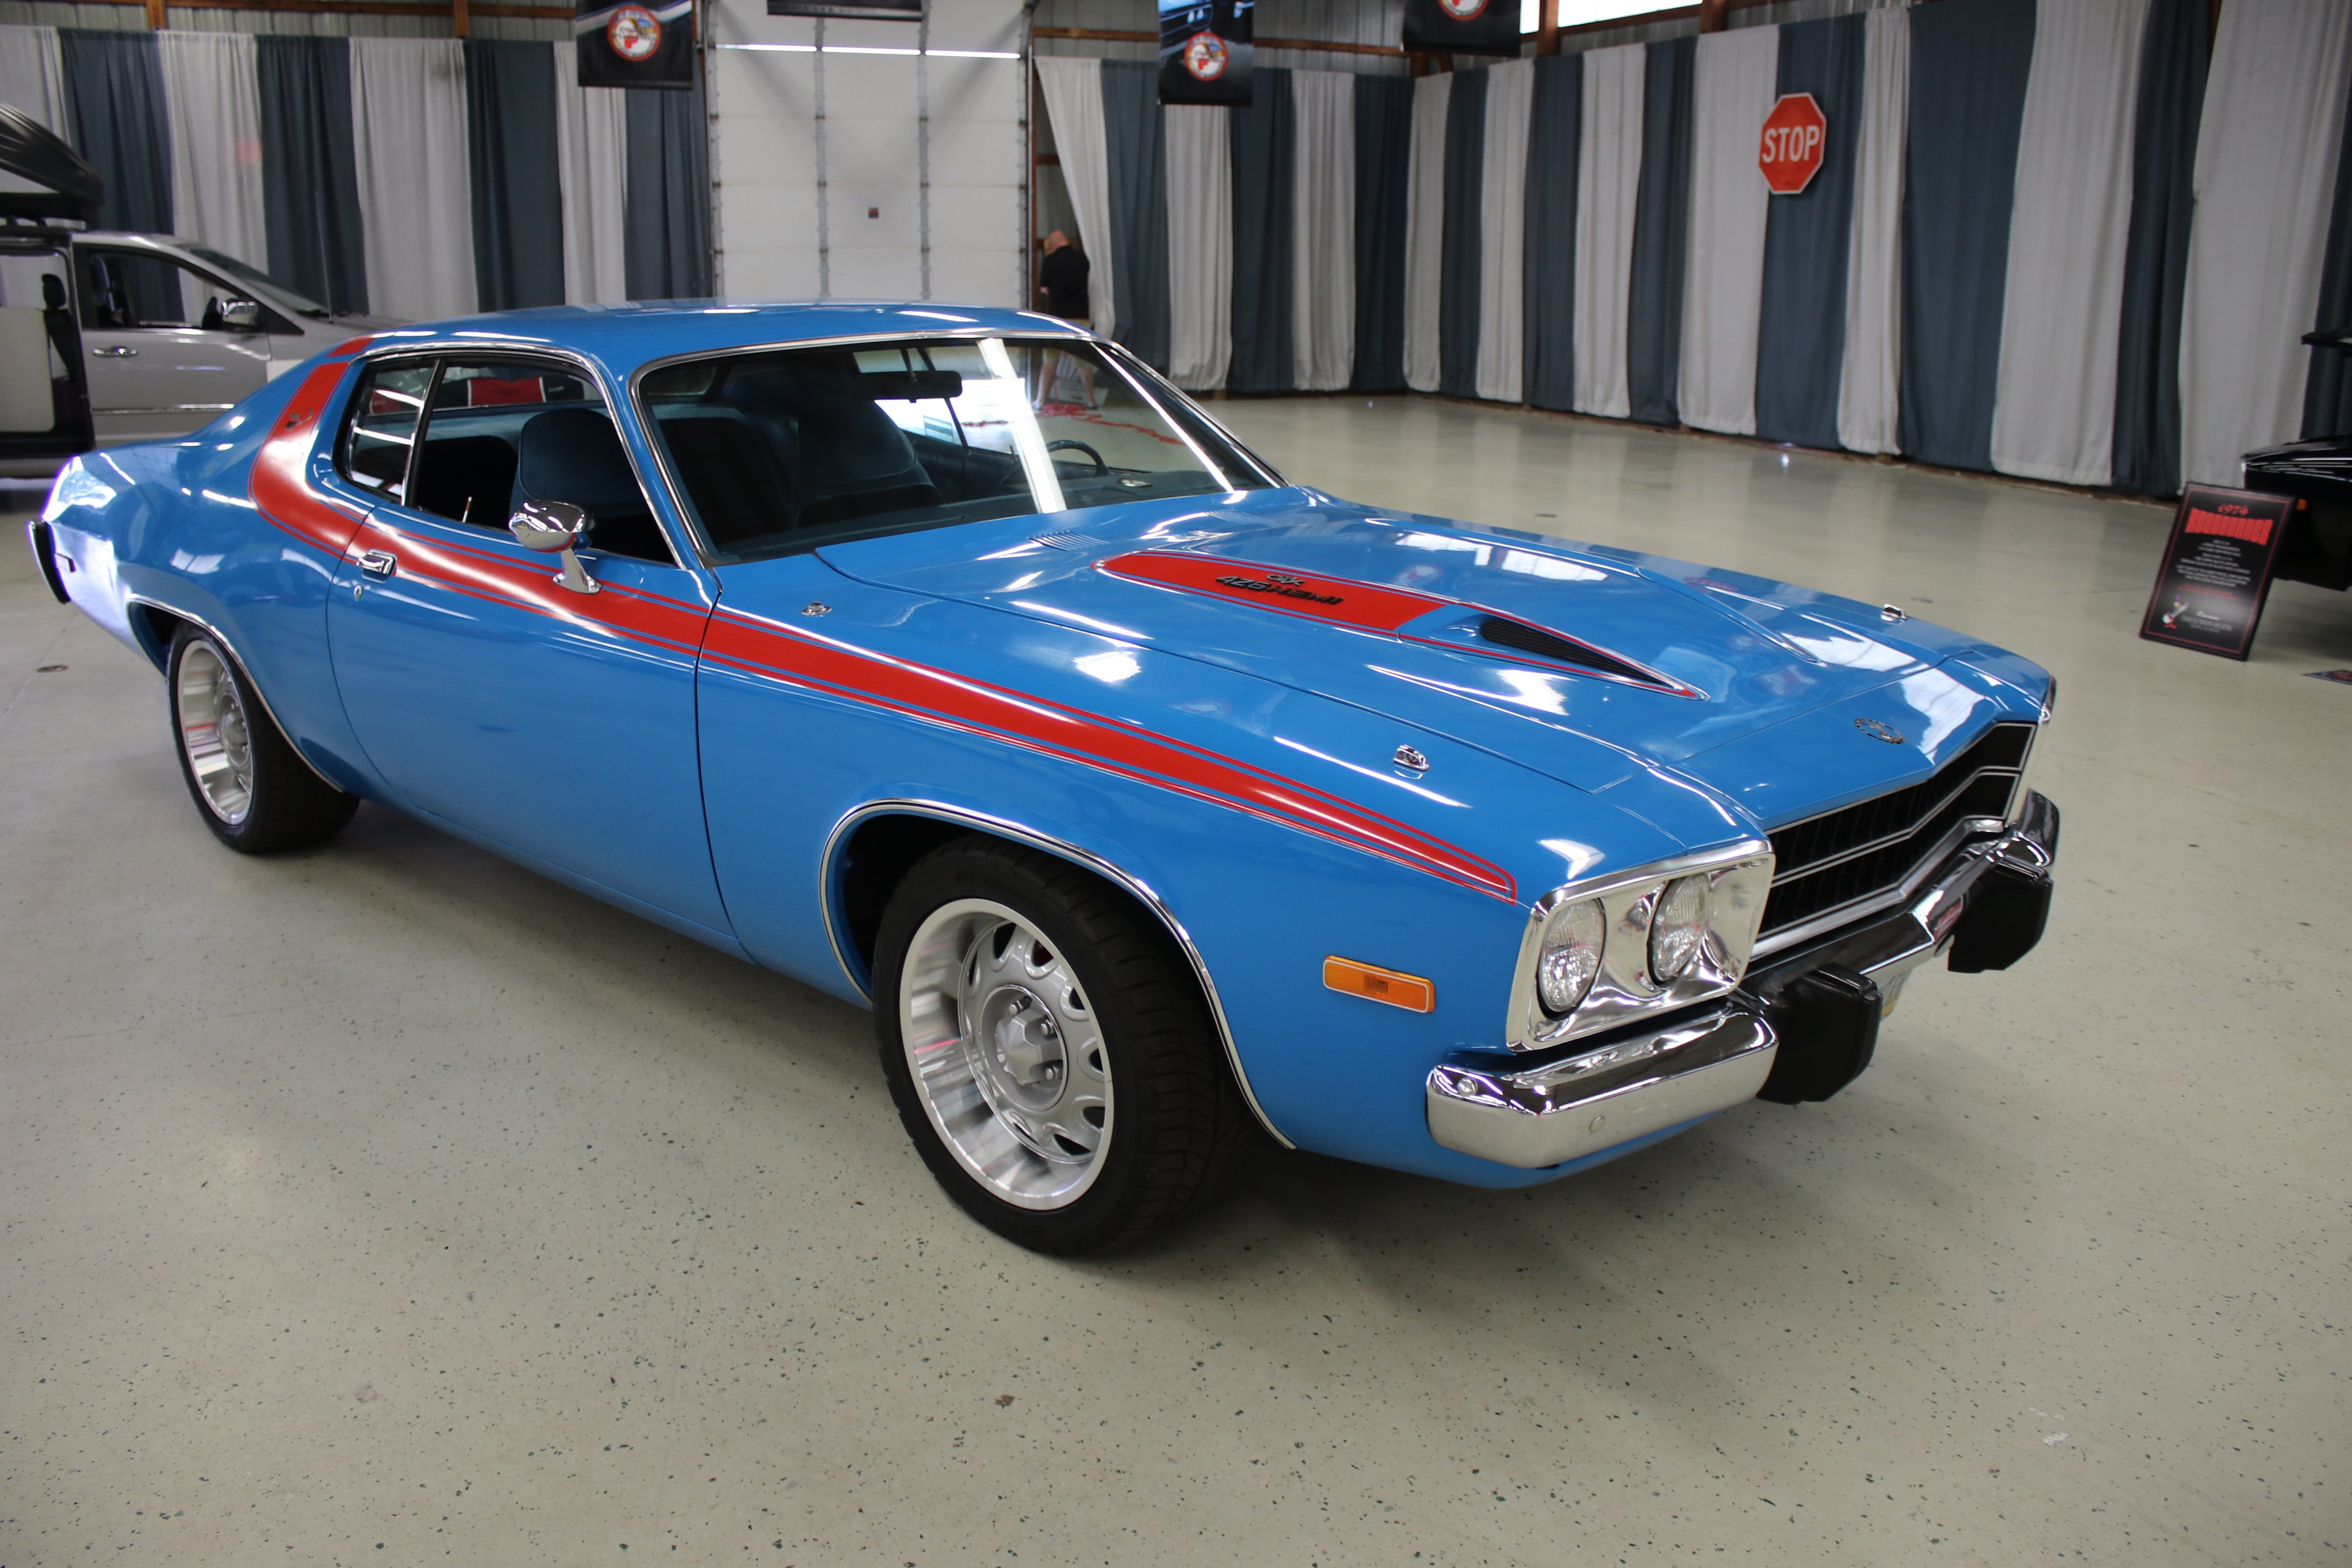 Paul's 1973 Plymouth Road Runner - Holley My Garage